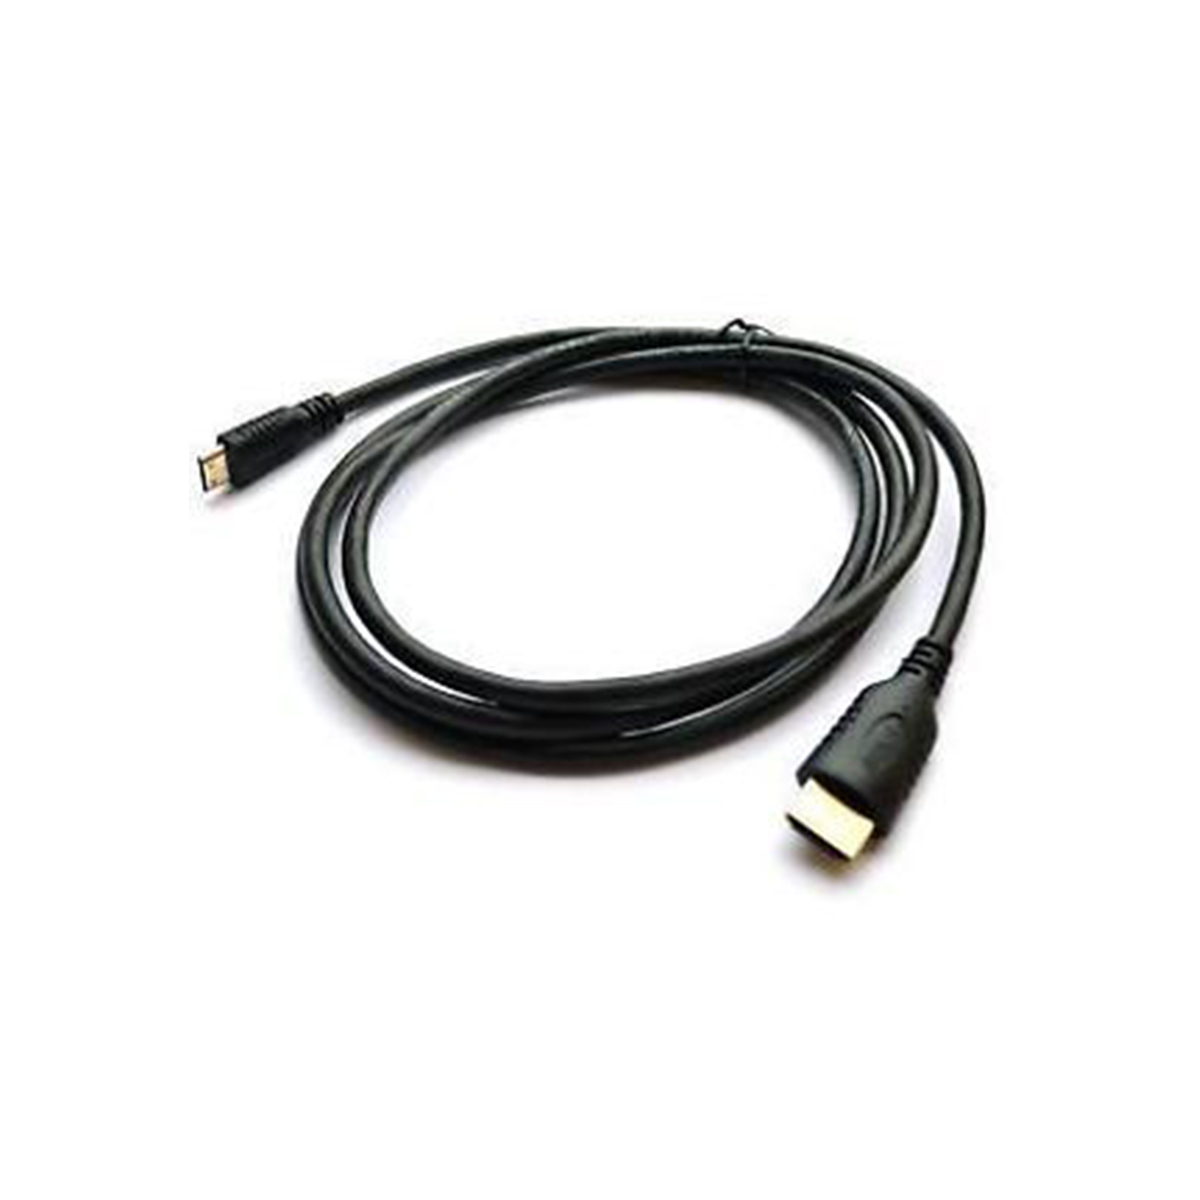 HDMI Cable For UO Smart Beam Laser Projector